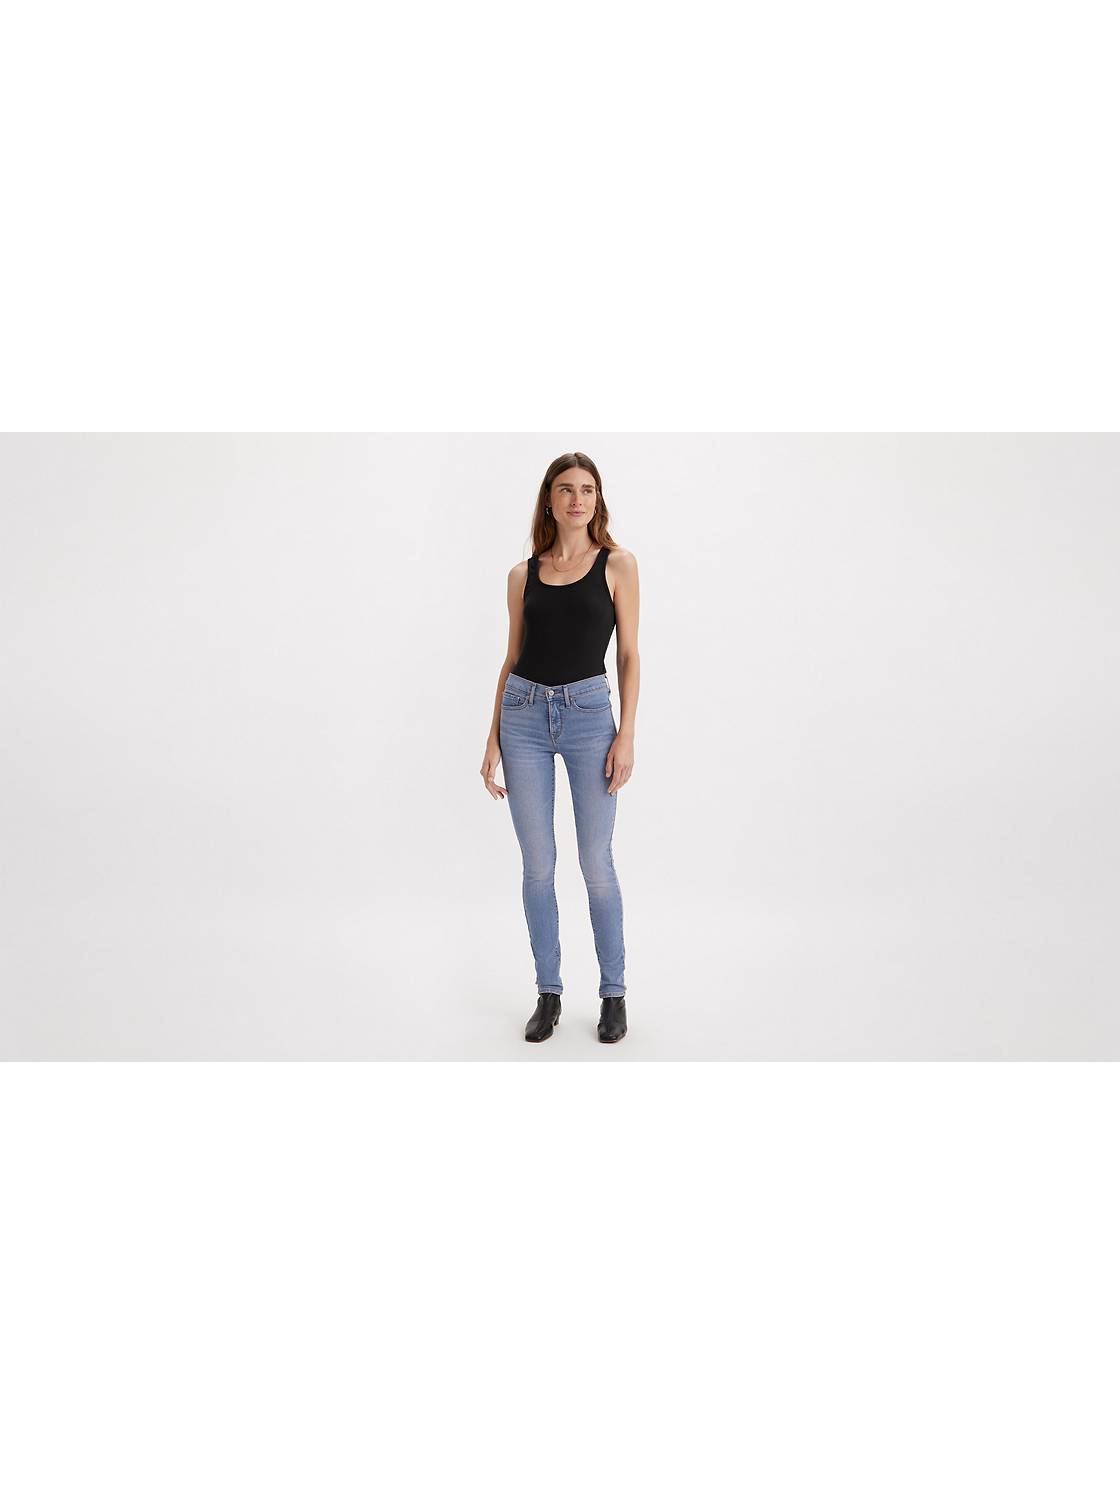 Women's Mid Rise Clothing New Arrivals